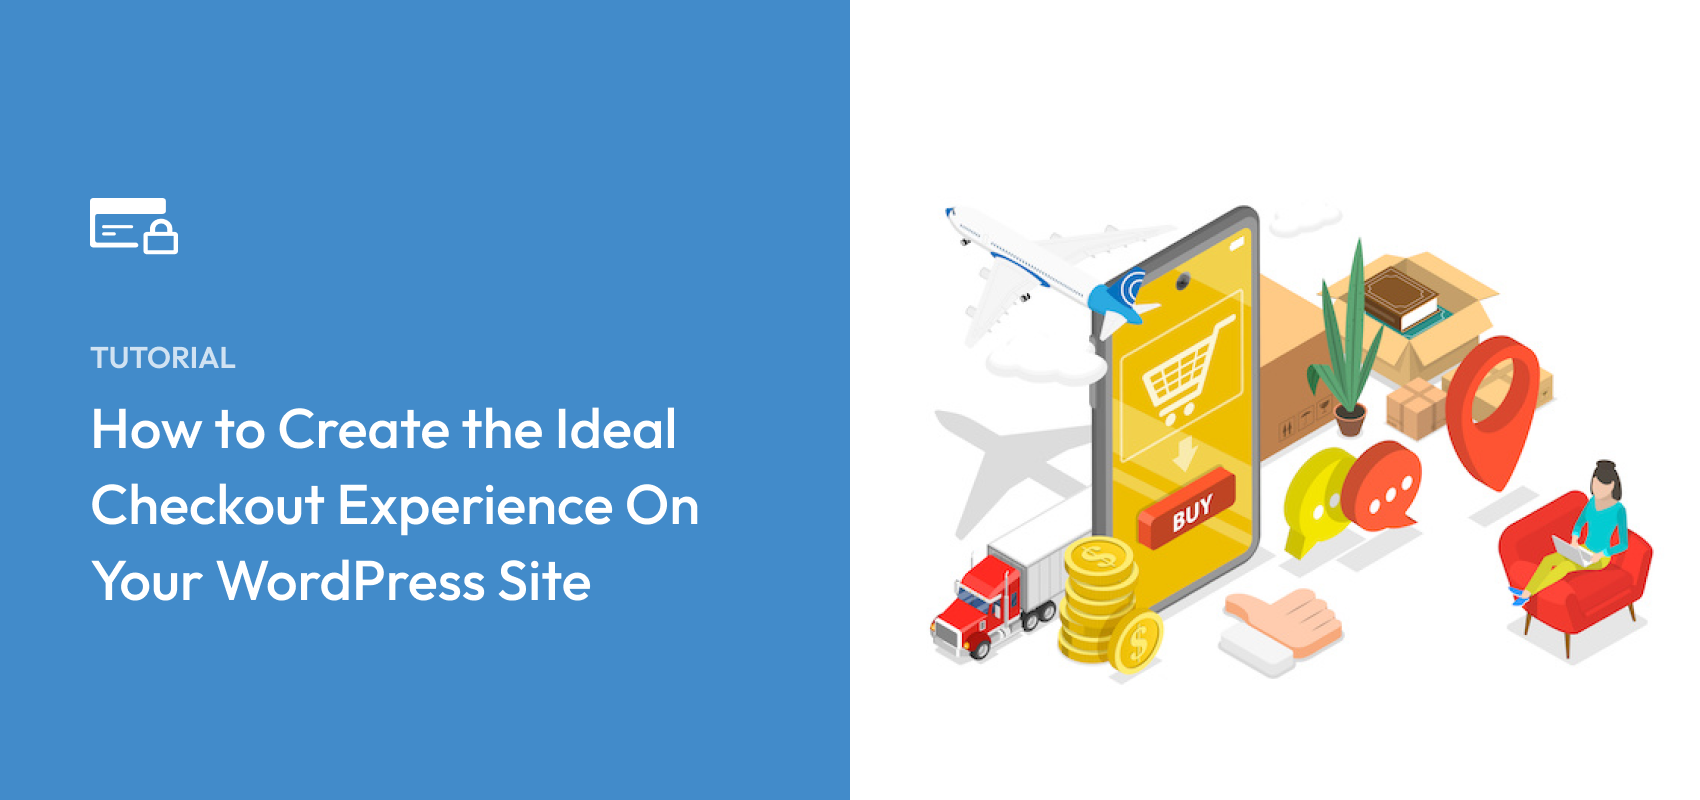 How to Create the Ideal Checkout Experience On Your WordPress Site